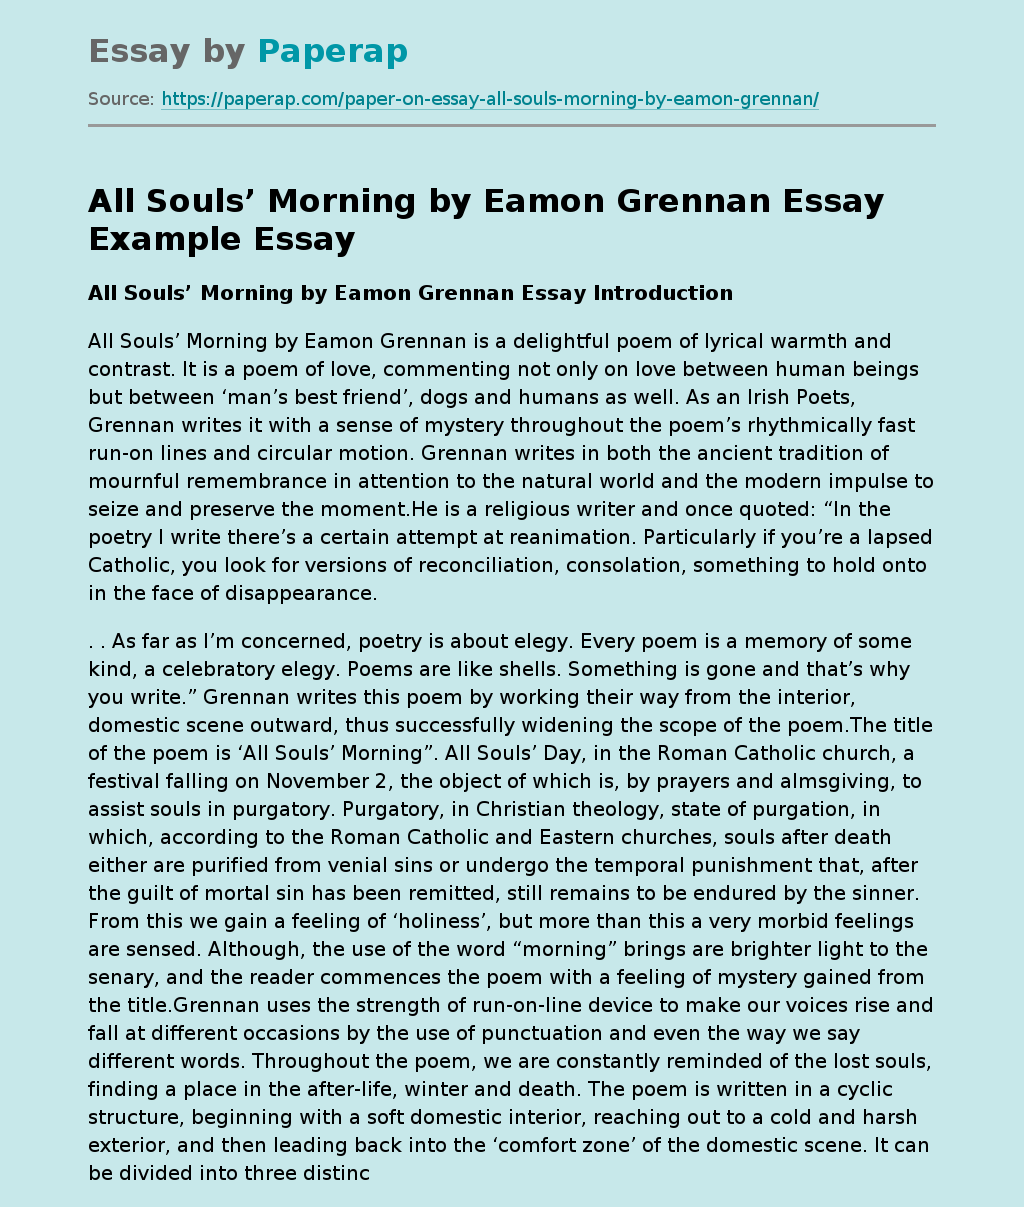 All Souls’ Morning by Eamon Grennan Essay Example